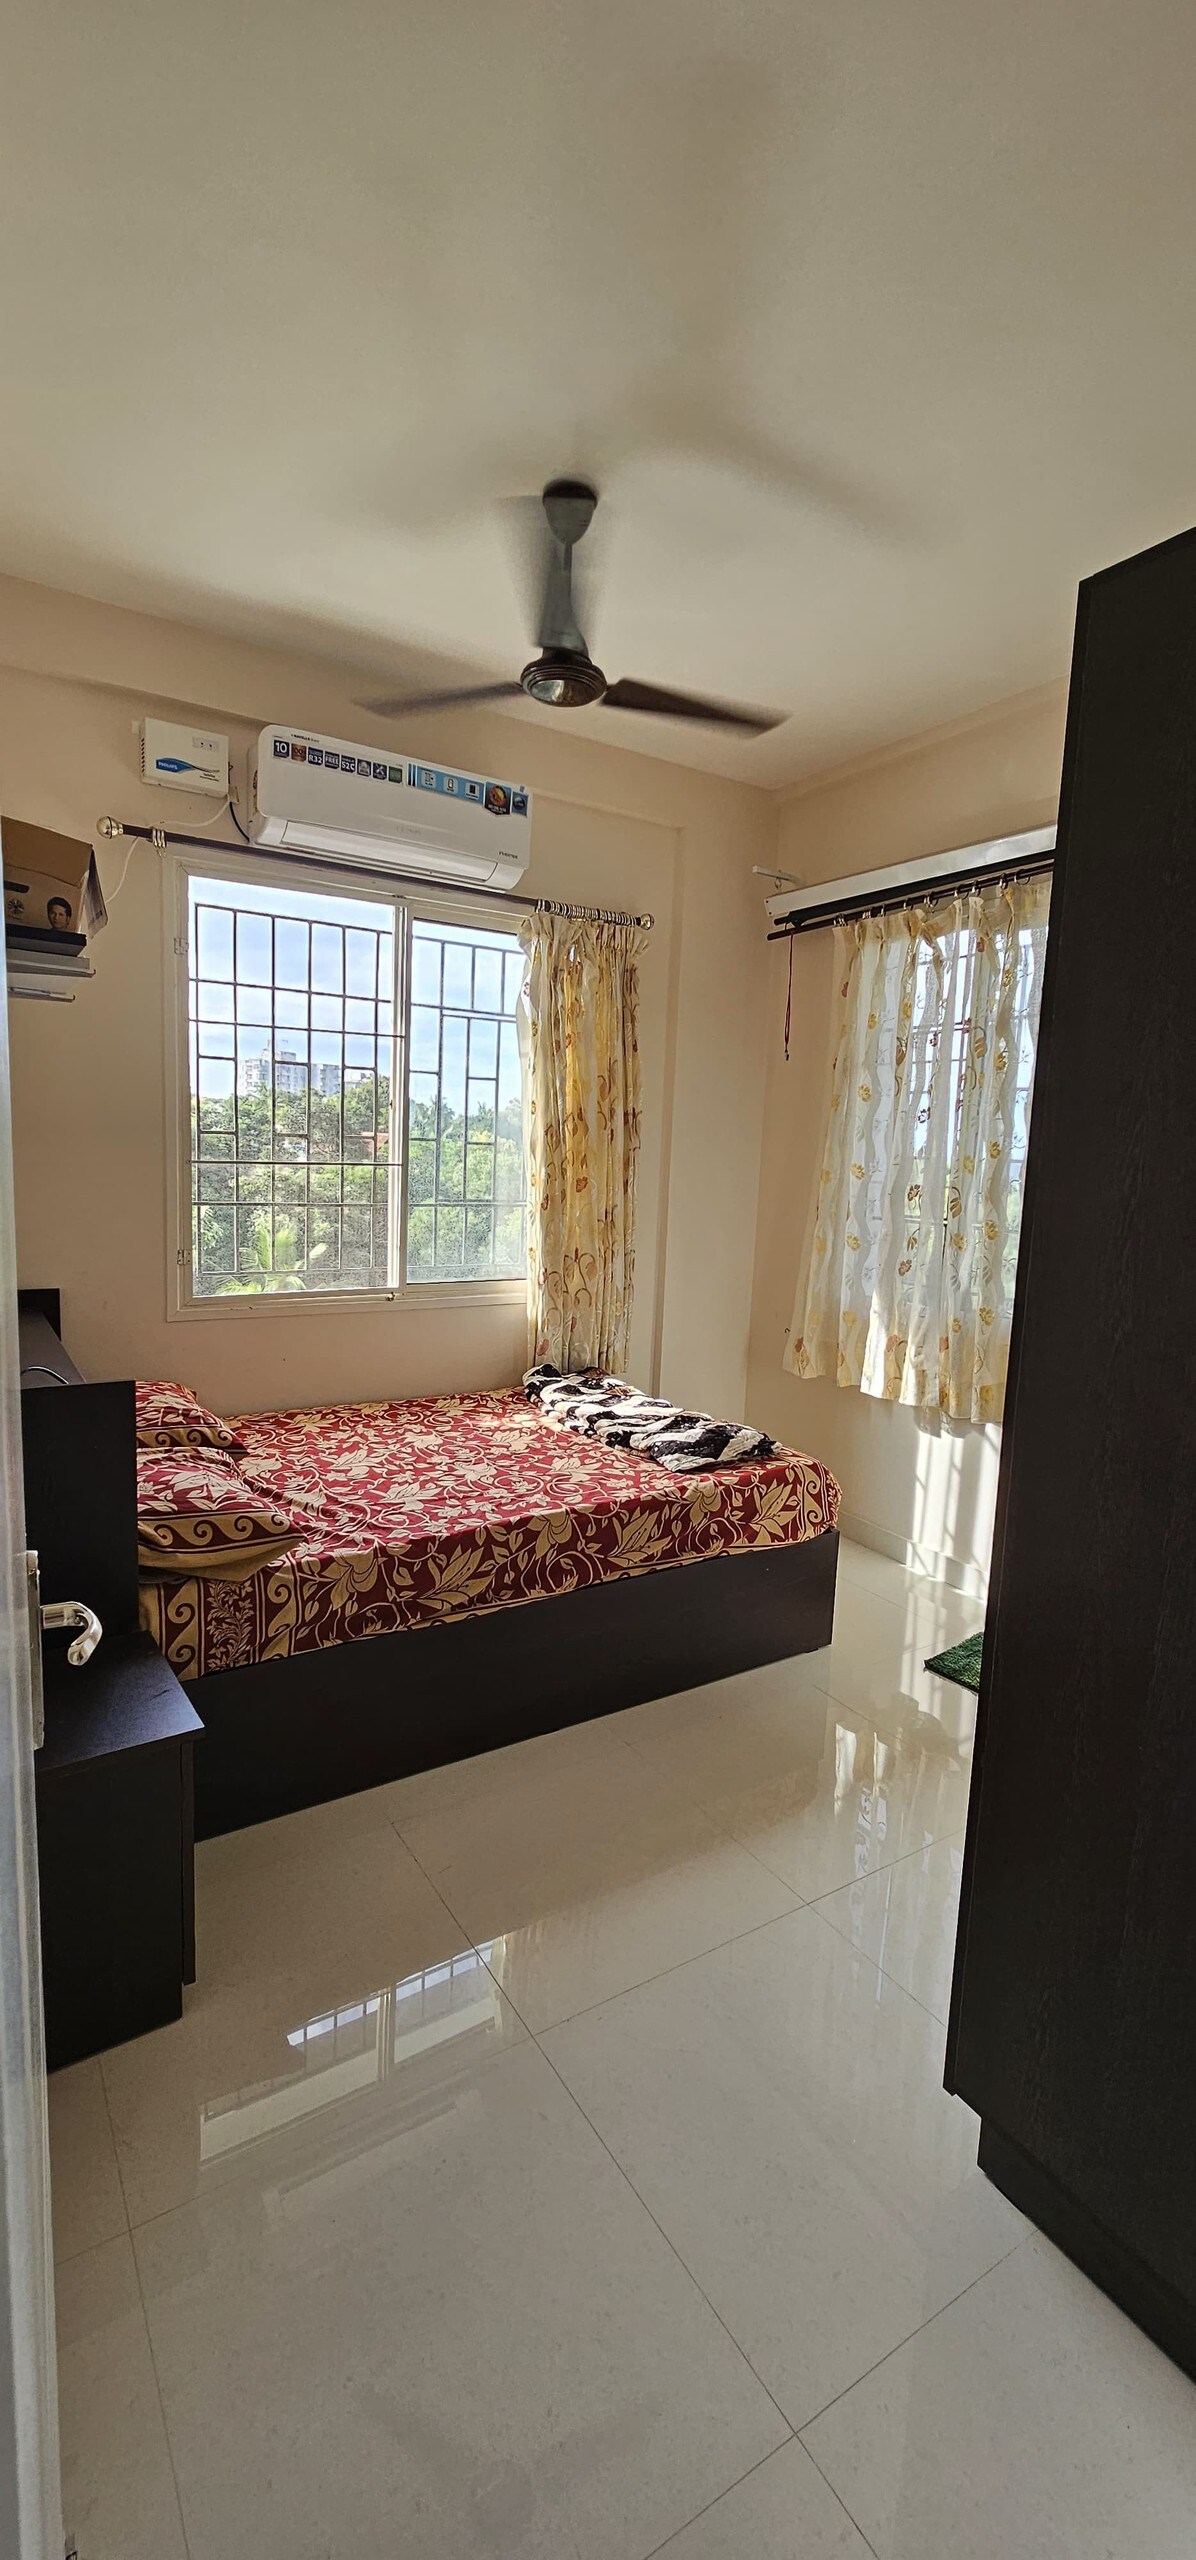 Laus Deo 2:Quiet & Cosy 2BHK flat on 9th top floor